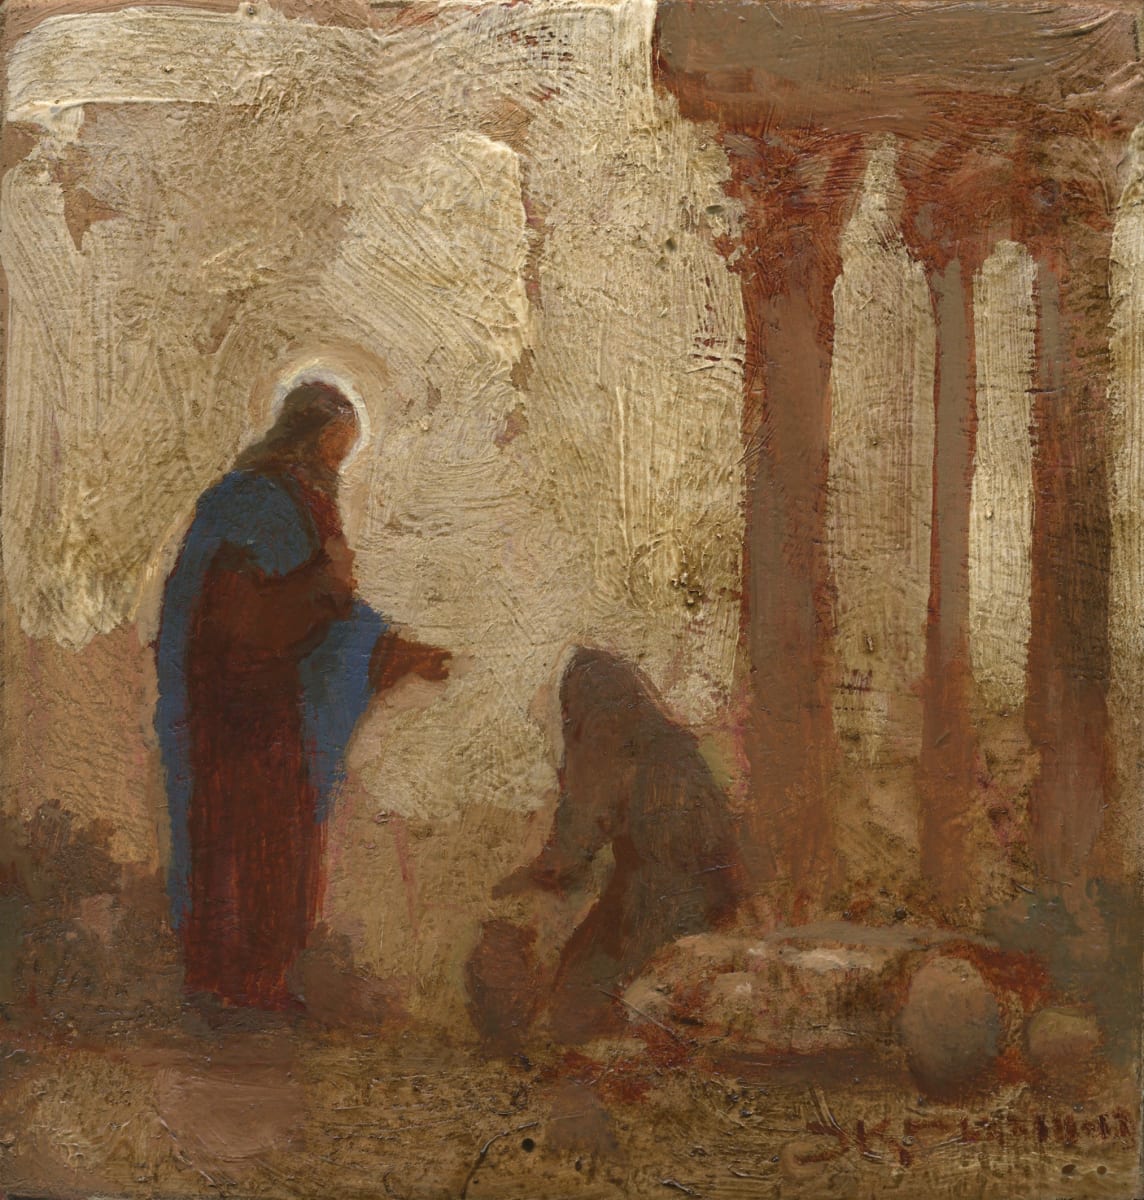 Woman at the Well by J. Kirk Richards  Image: Christ stops to heal a woman at a well. 